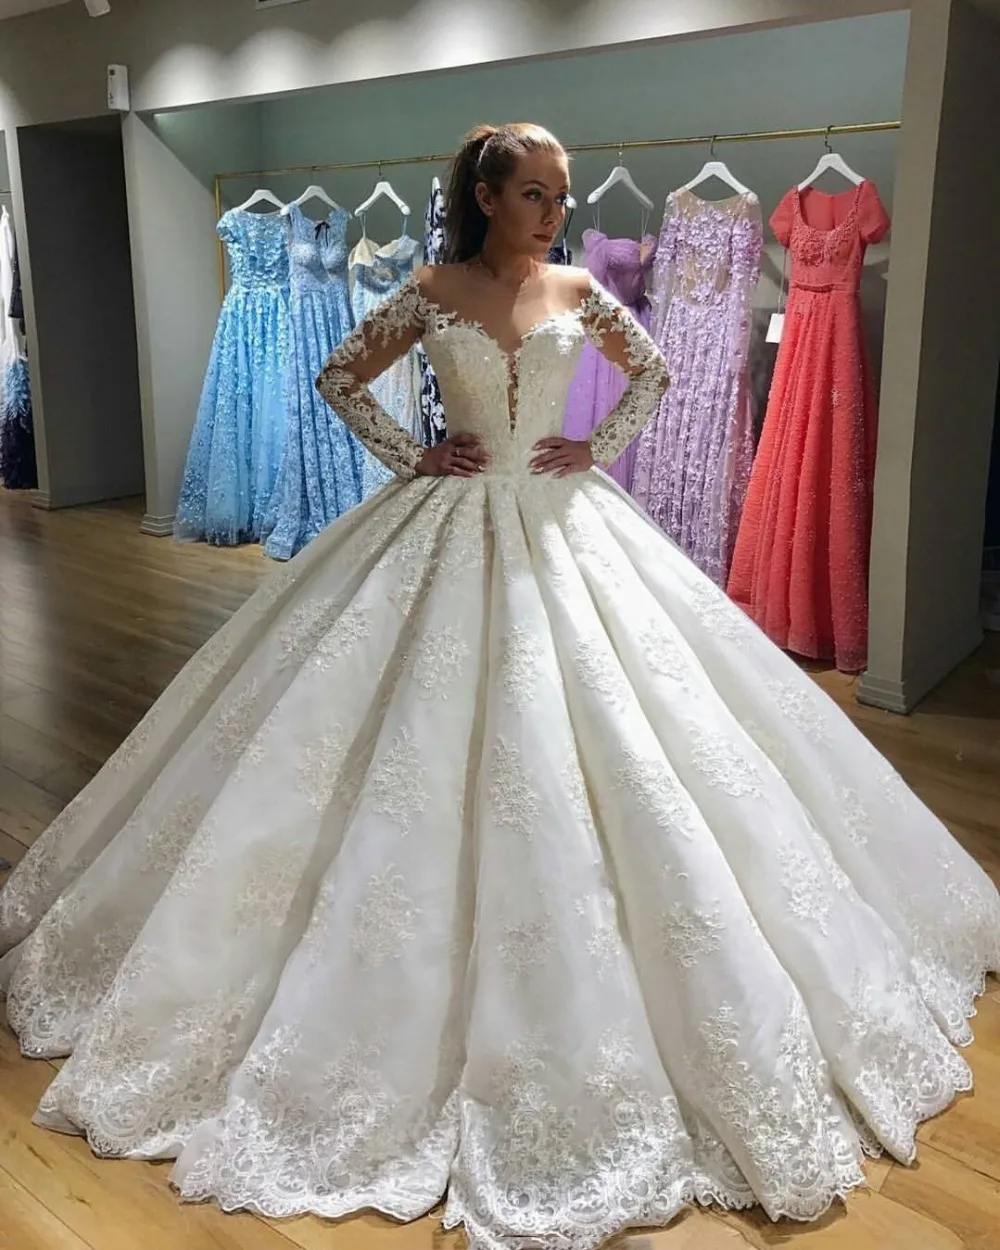 2018 New Long Sleeve Wedding Dress Lace Appliques Ball Bridal Gowns Custom Made 